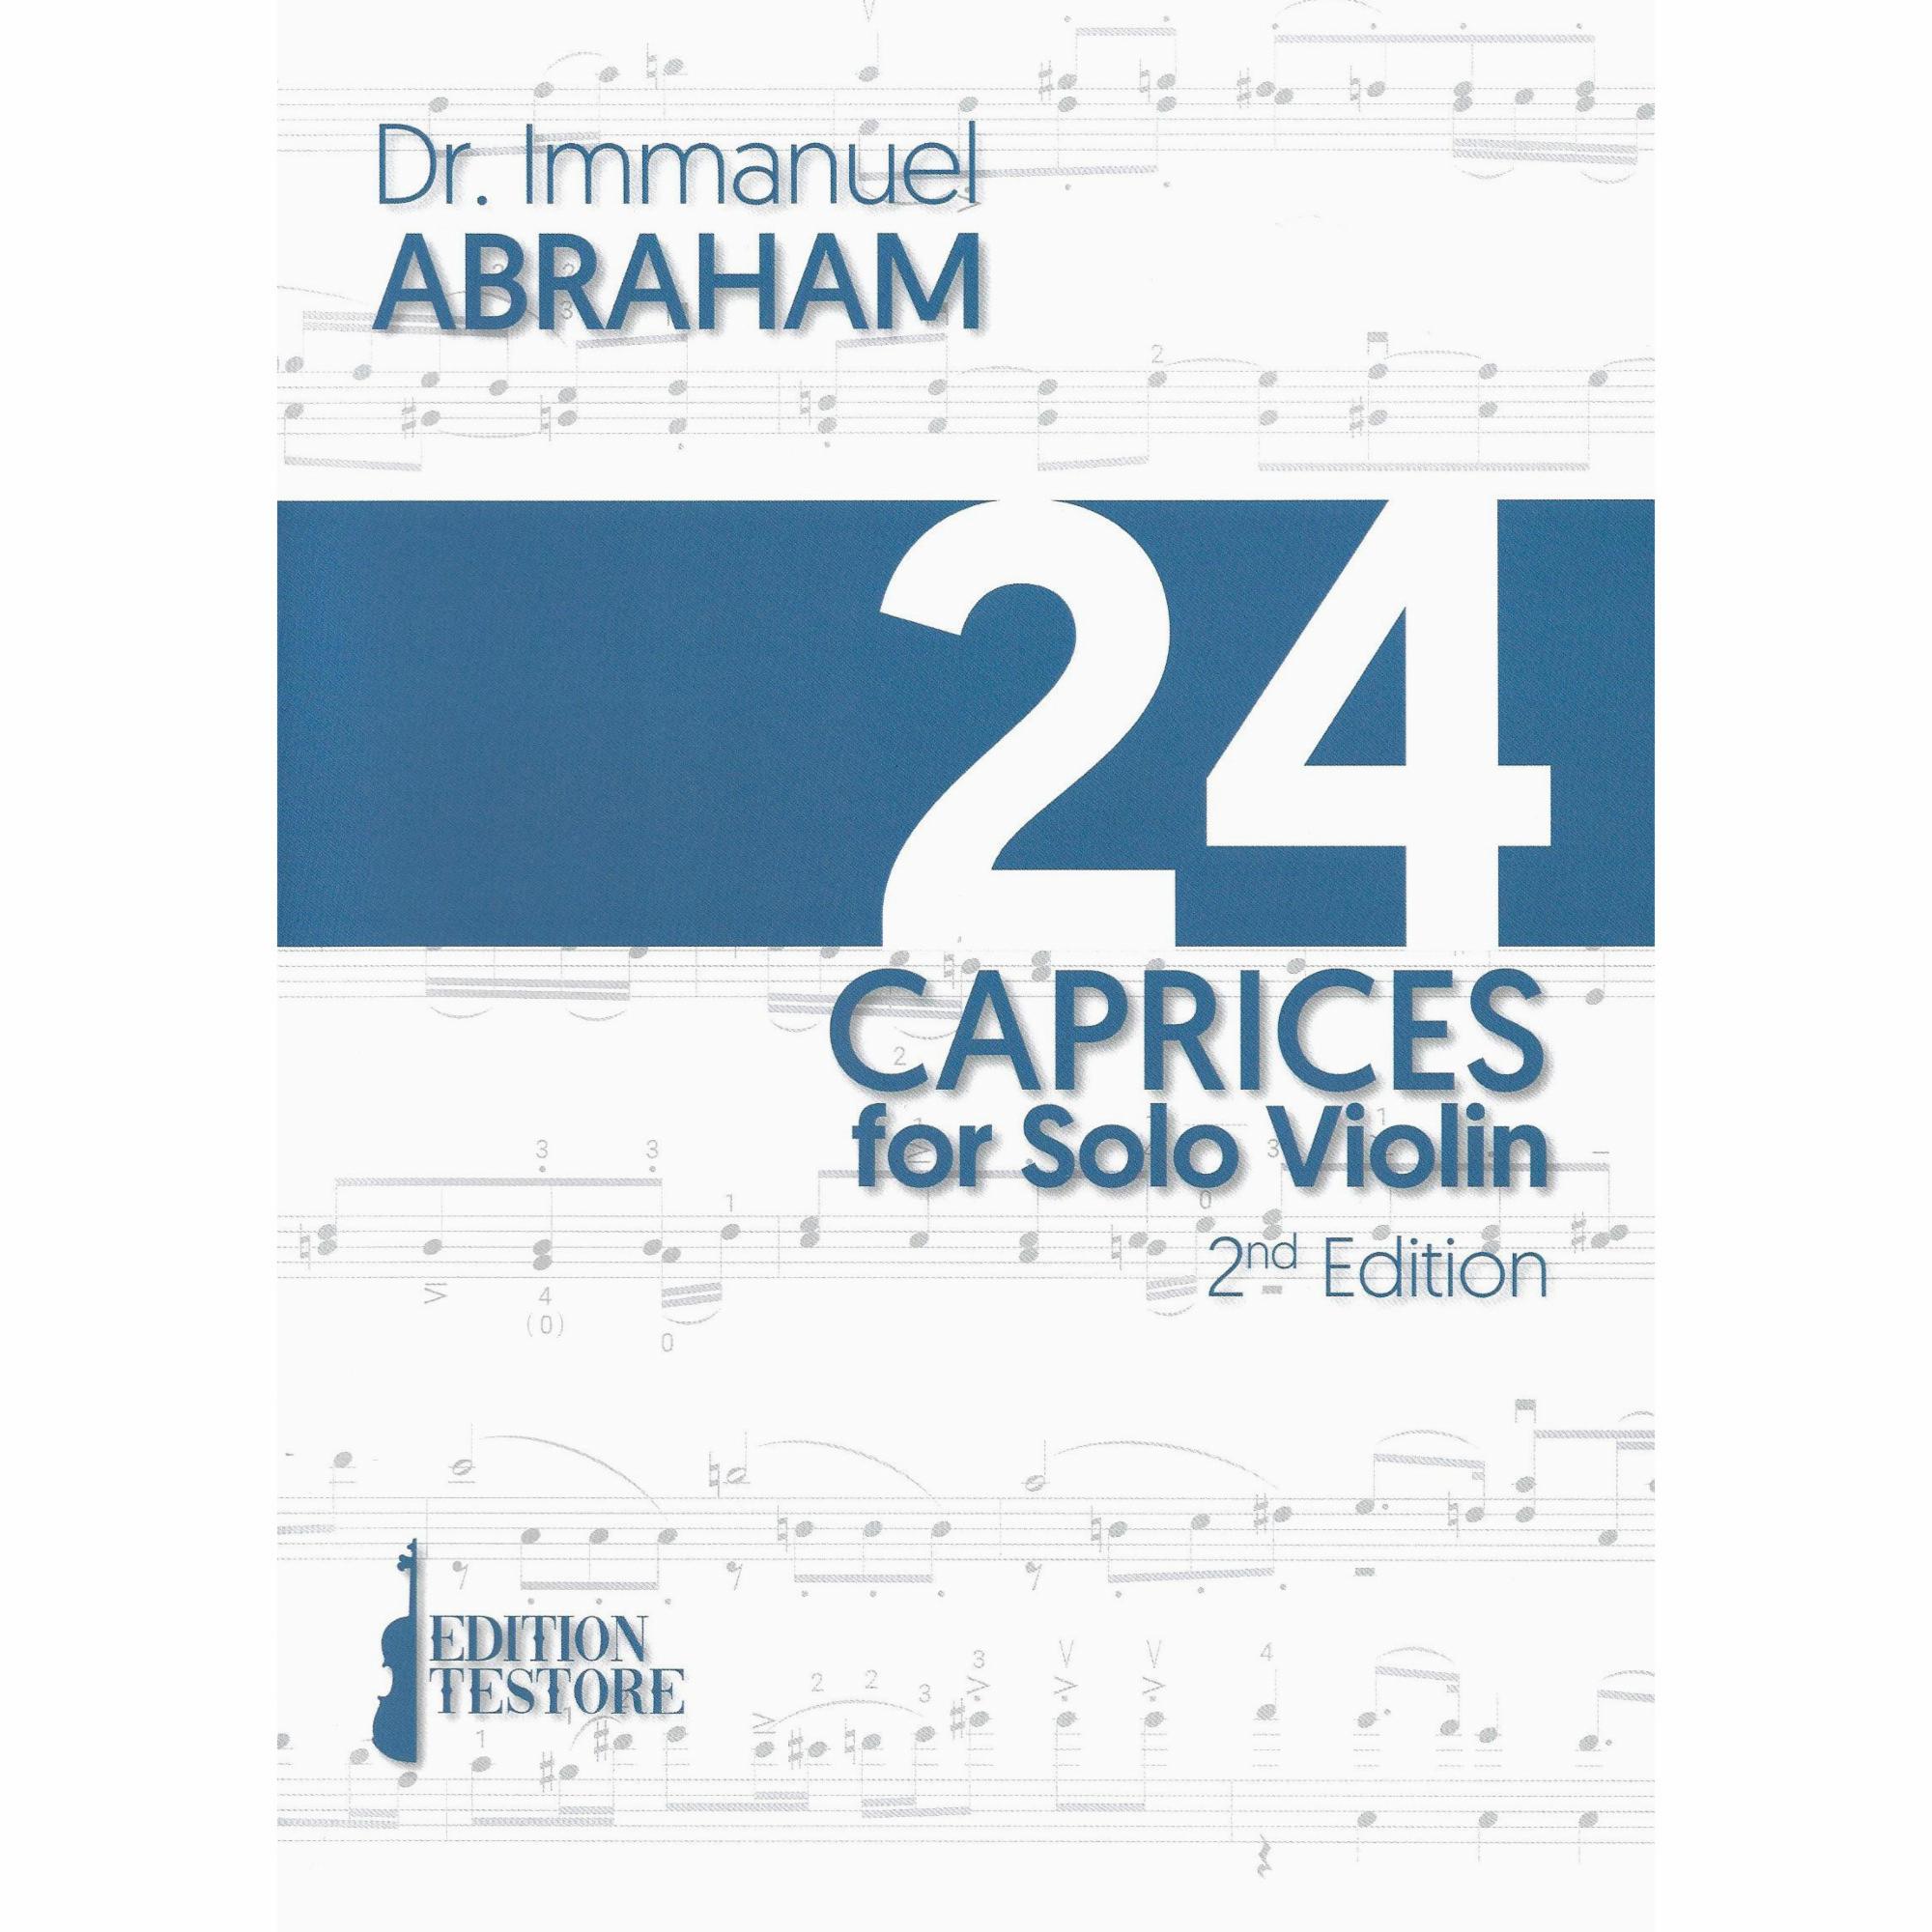 Abraham -- 24 Caprices for Solo Violin